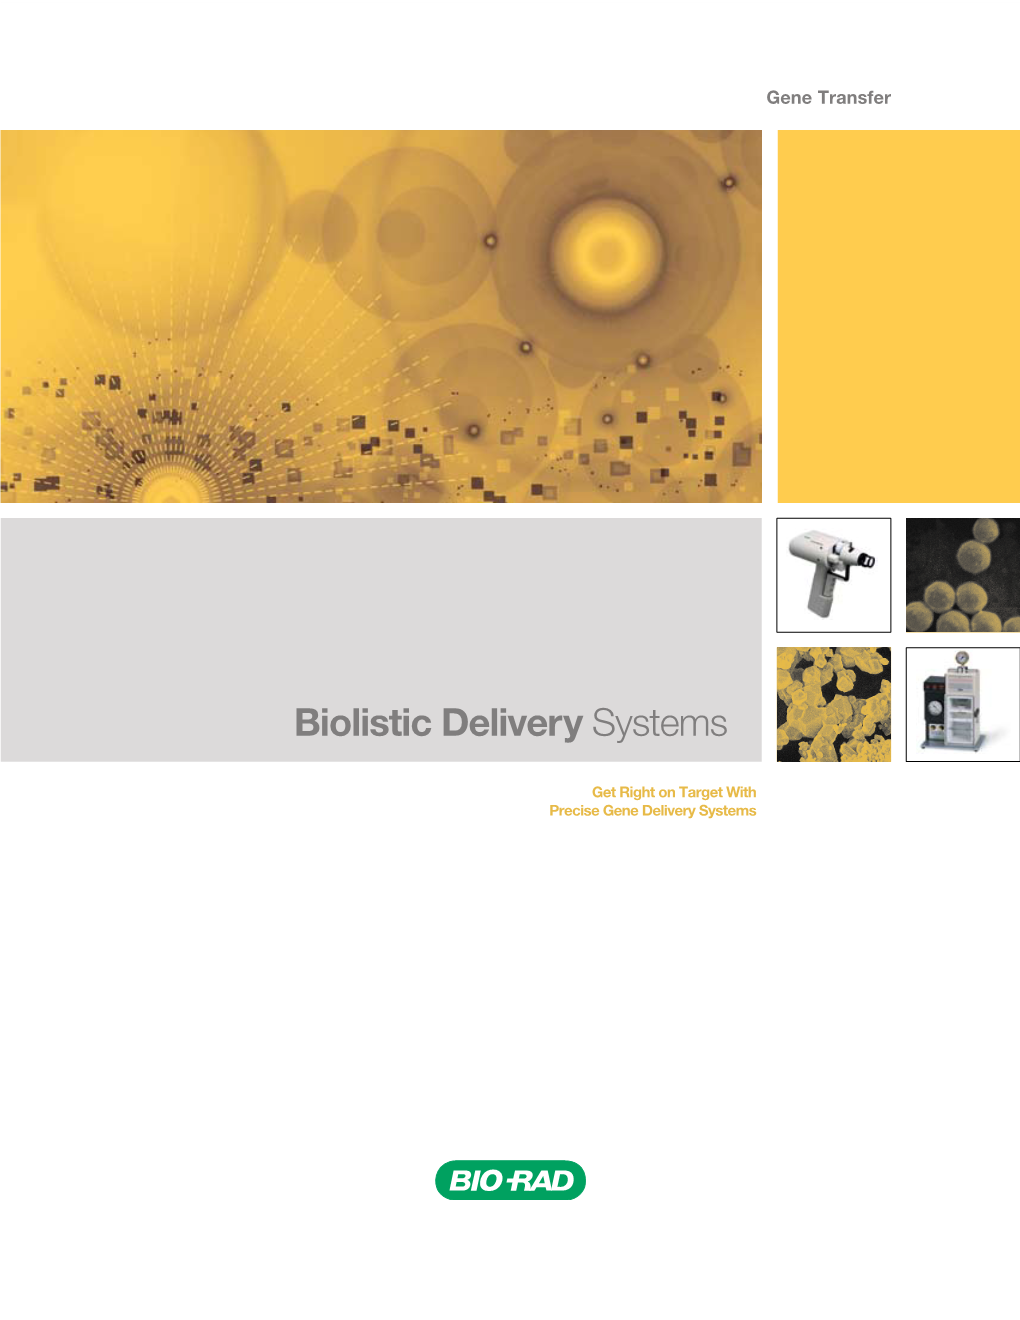 Biolistic Delivery Systems